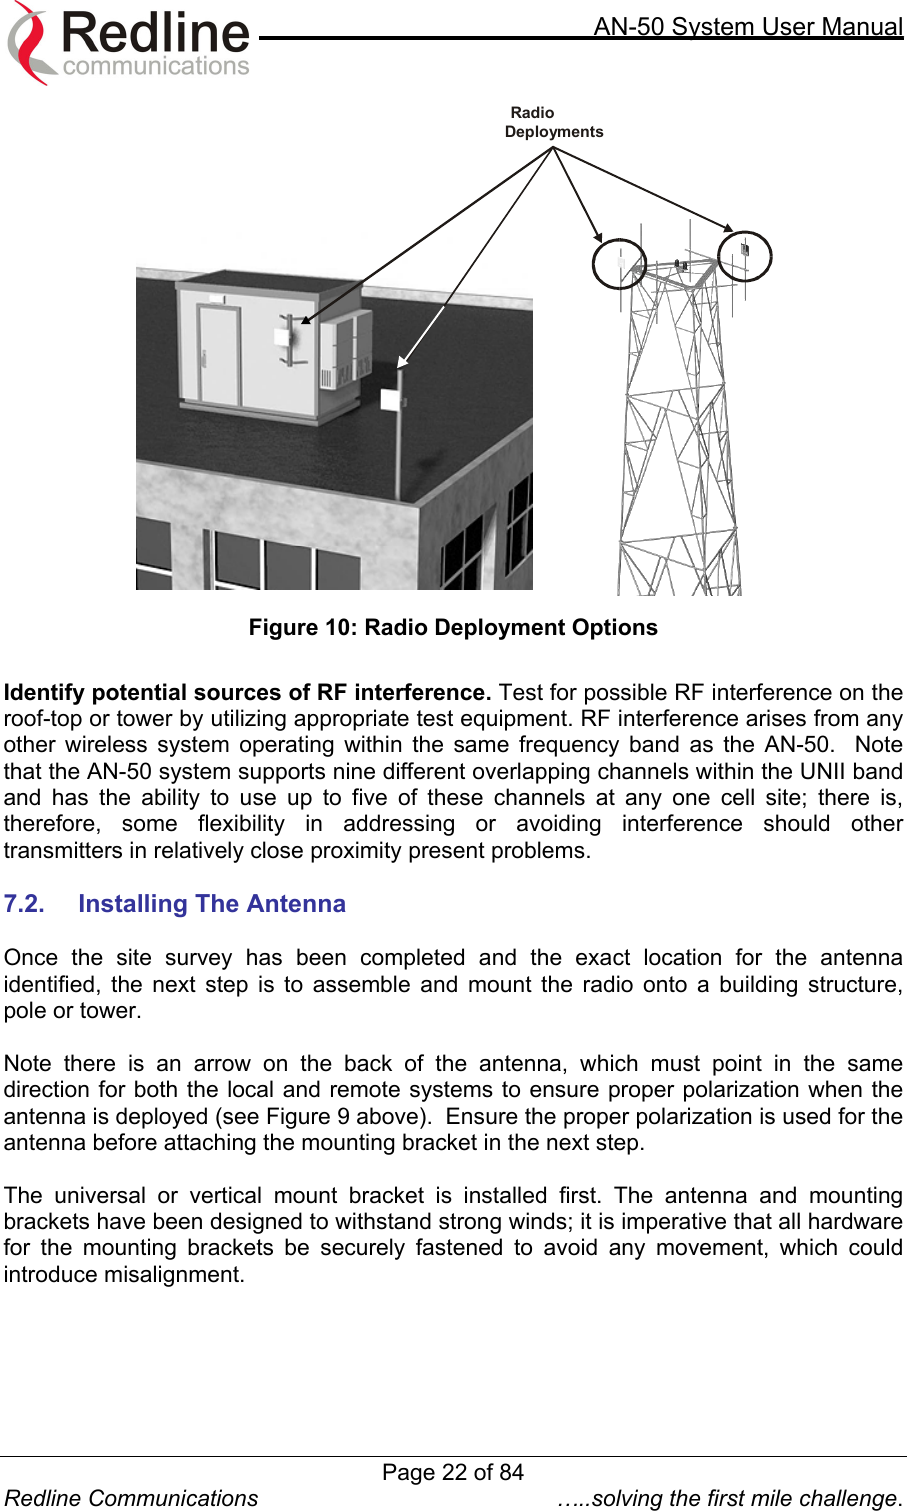     AN-50 System User Manual  Redline Communications  …..solving the first mile challenge.  RadioDeployments Figure 10: Radio Deployment Options  Identify potential sources of RF interference. Test for possible RF interference on the roof-top or tower by utilizing appropriate test equipment. RF interference arises from any other wireless system operating within the same frequency band as the AN-50.  Note that the AN-50 system supports nine different overlapping channels within the UNII band and has the ability to use up to five of these channels at any one cell site; there is, therefore, some flexibility in addressing or avoiding interference should other transmitters in relatively close proximity present problems.      7.2.  Installing The Antenna   Once the site survey has been completed and the exact location for the antenna identified, the next step is to assemble and mount the radio onto a building structure, pole or tower.   Note there is an arrow on the back of the antenna, which must point in the same direction for both the local and remote systems to ensure proper polarization when the antenna is deployed (see Figure 9 above).  Ensure the proper polarization is used for the antenna before attaching the mounting bracket in the next step.  The universal or vertical mount bracket is installed first. The antenna and mounting brackets have been designed to withstand strong winds; it is imperative that all hardware for the mounting brackets be securely fastened to avoid any movement, which could introduce misalignment.   Page 22 of 84